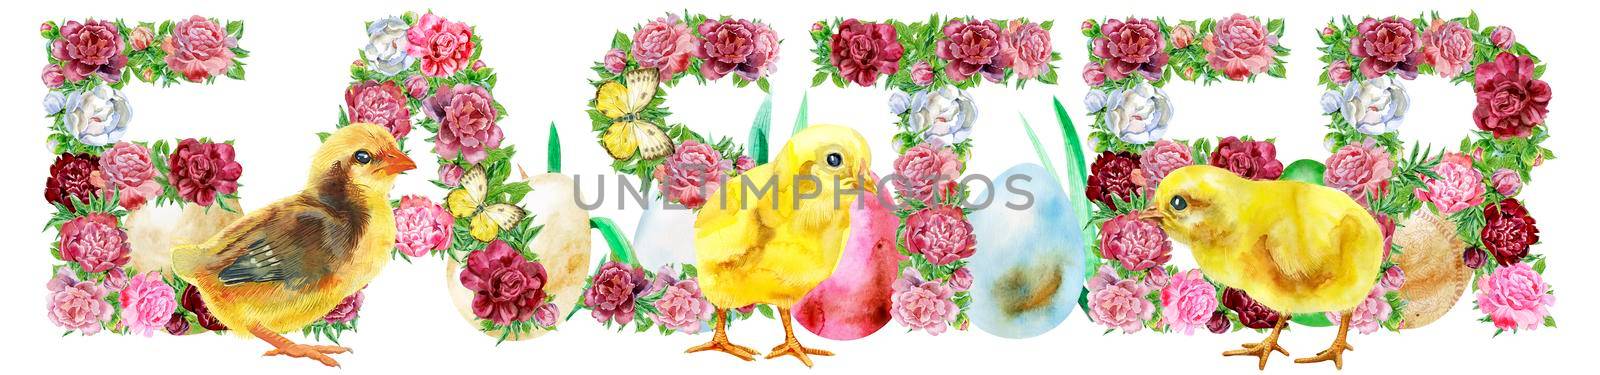 Watercolor illustration flower word EASTER with chickens and eggs by NataOmsk